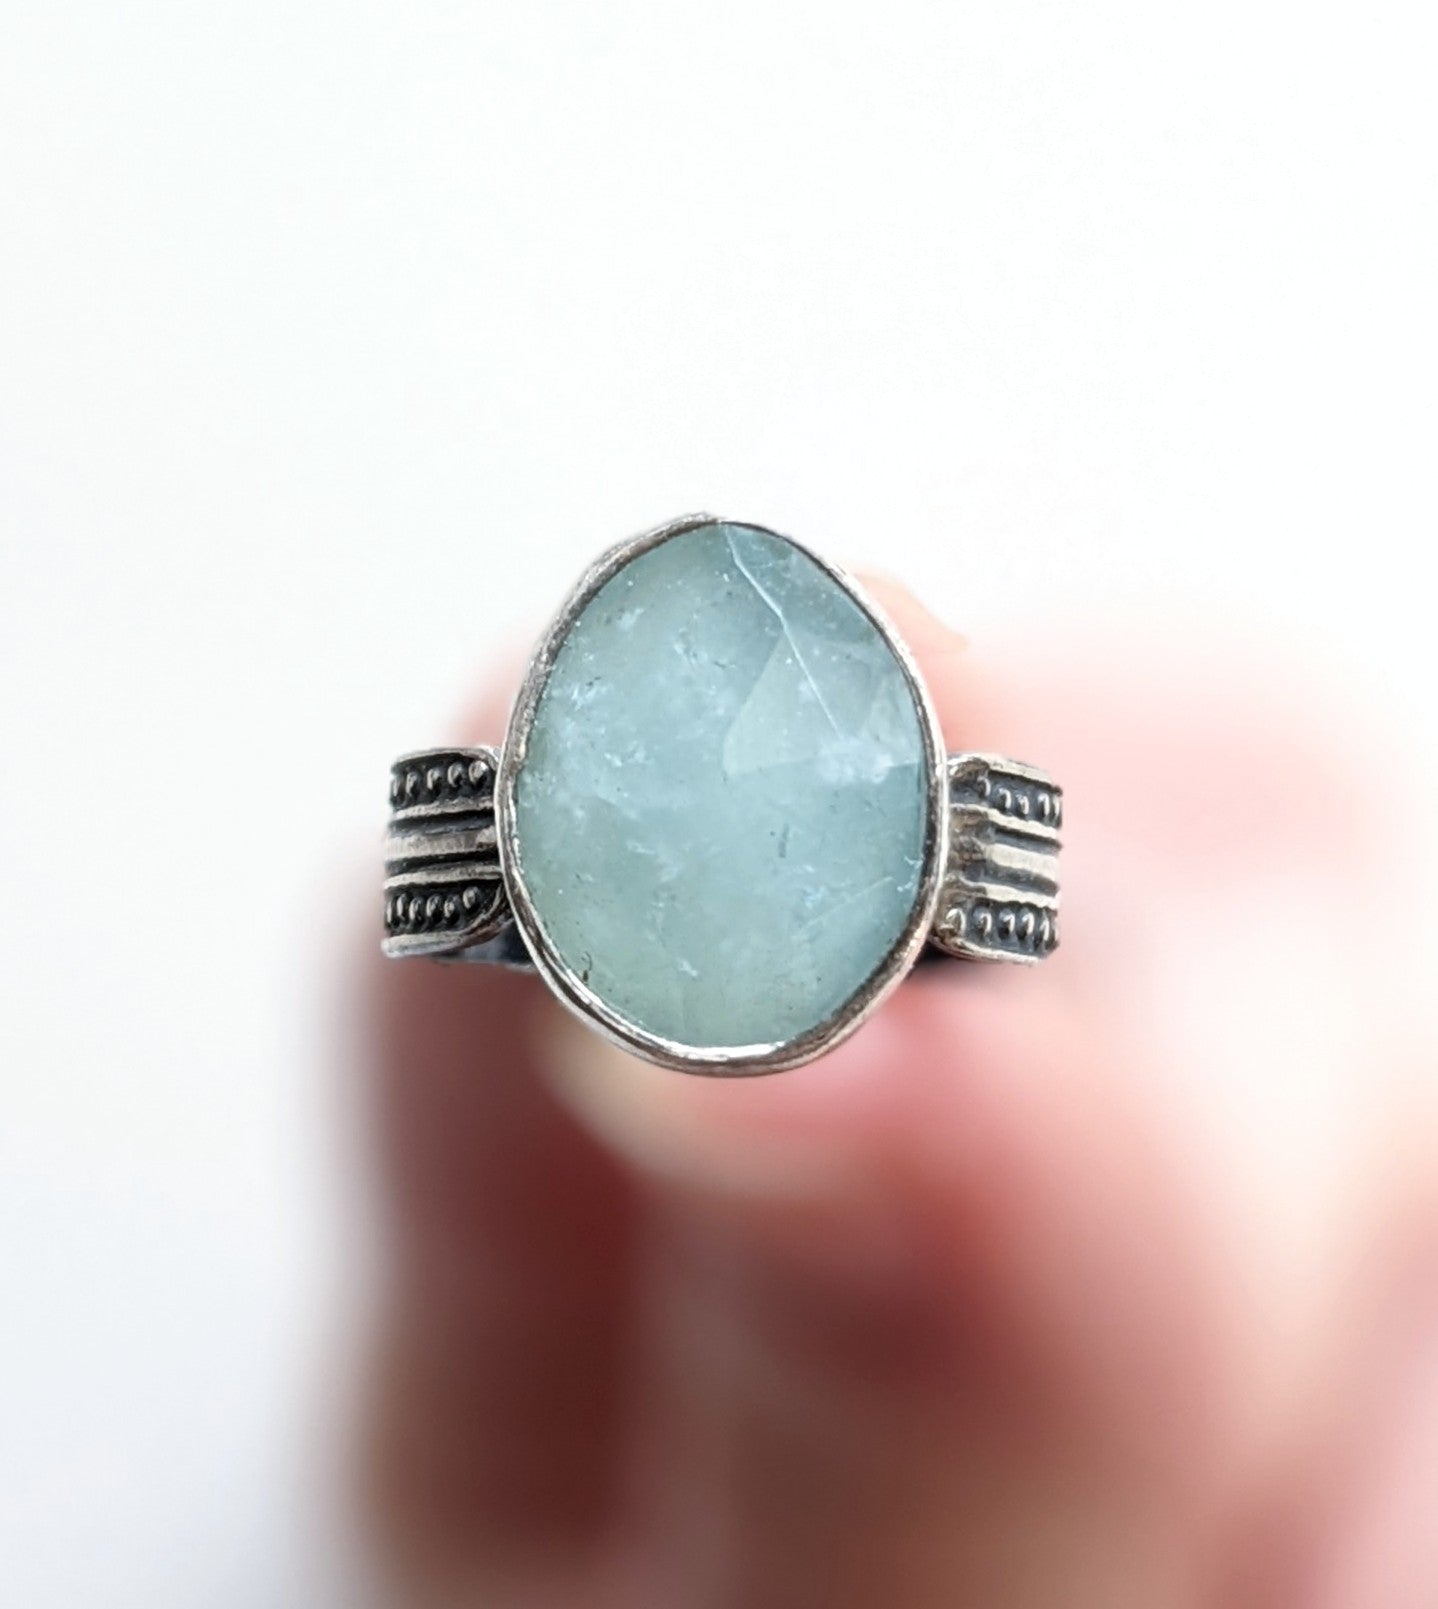 Sterling Silver Aquamarine Ring Size 5.5 US